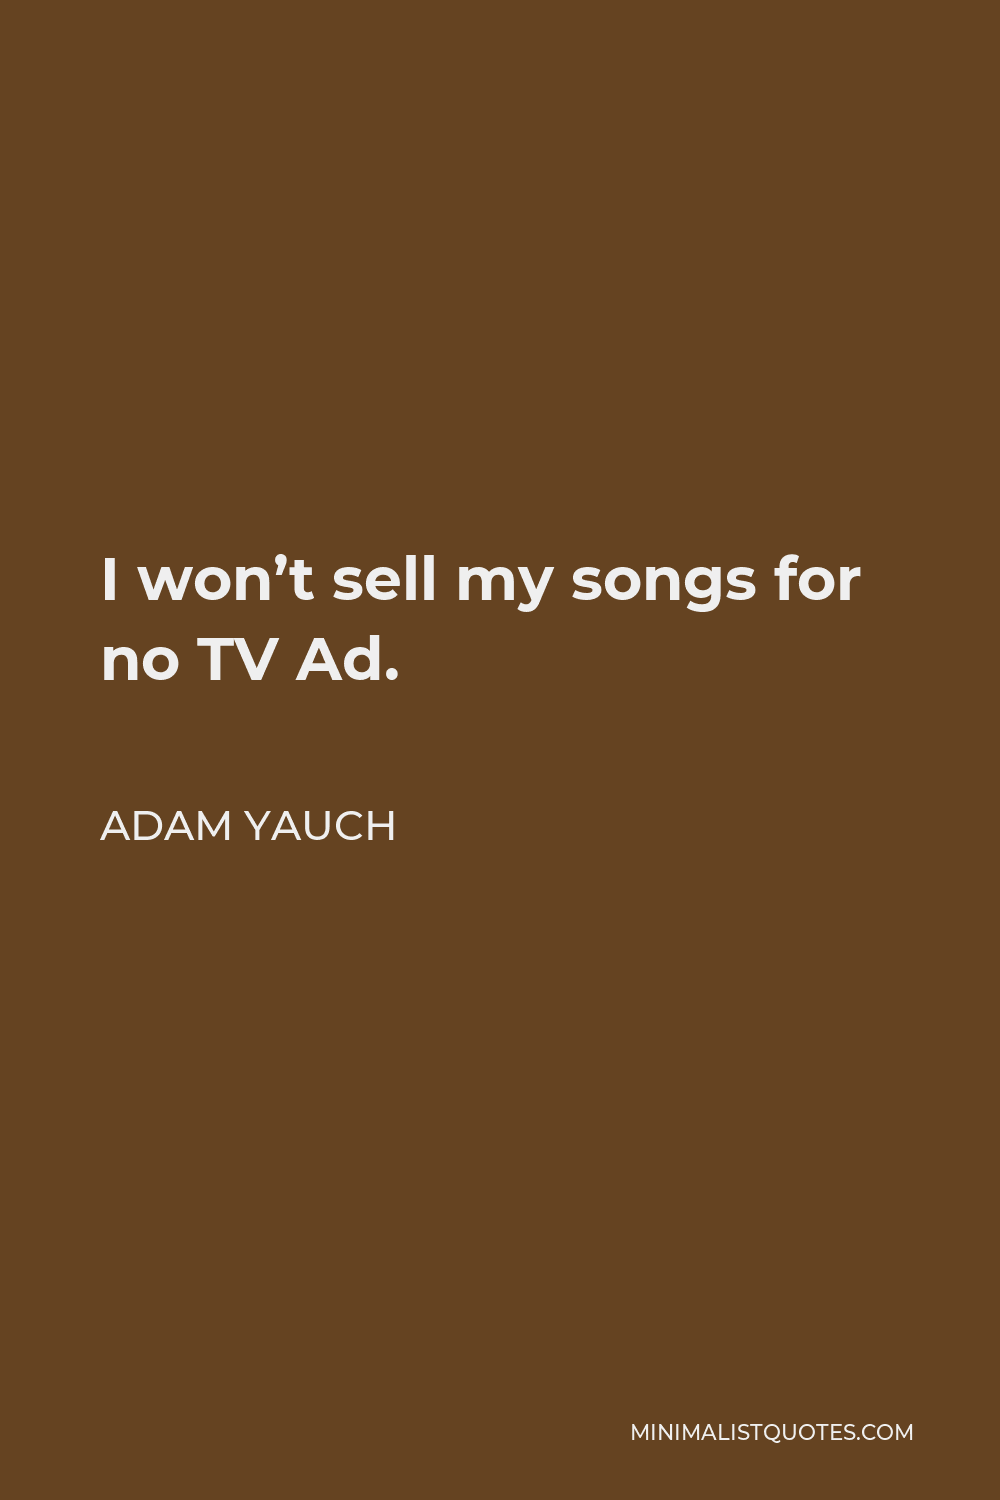 Adam Yauch Quote - I won’t sell my songs for no TV Ad.